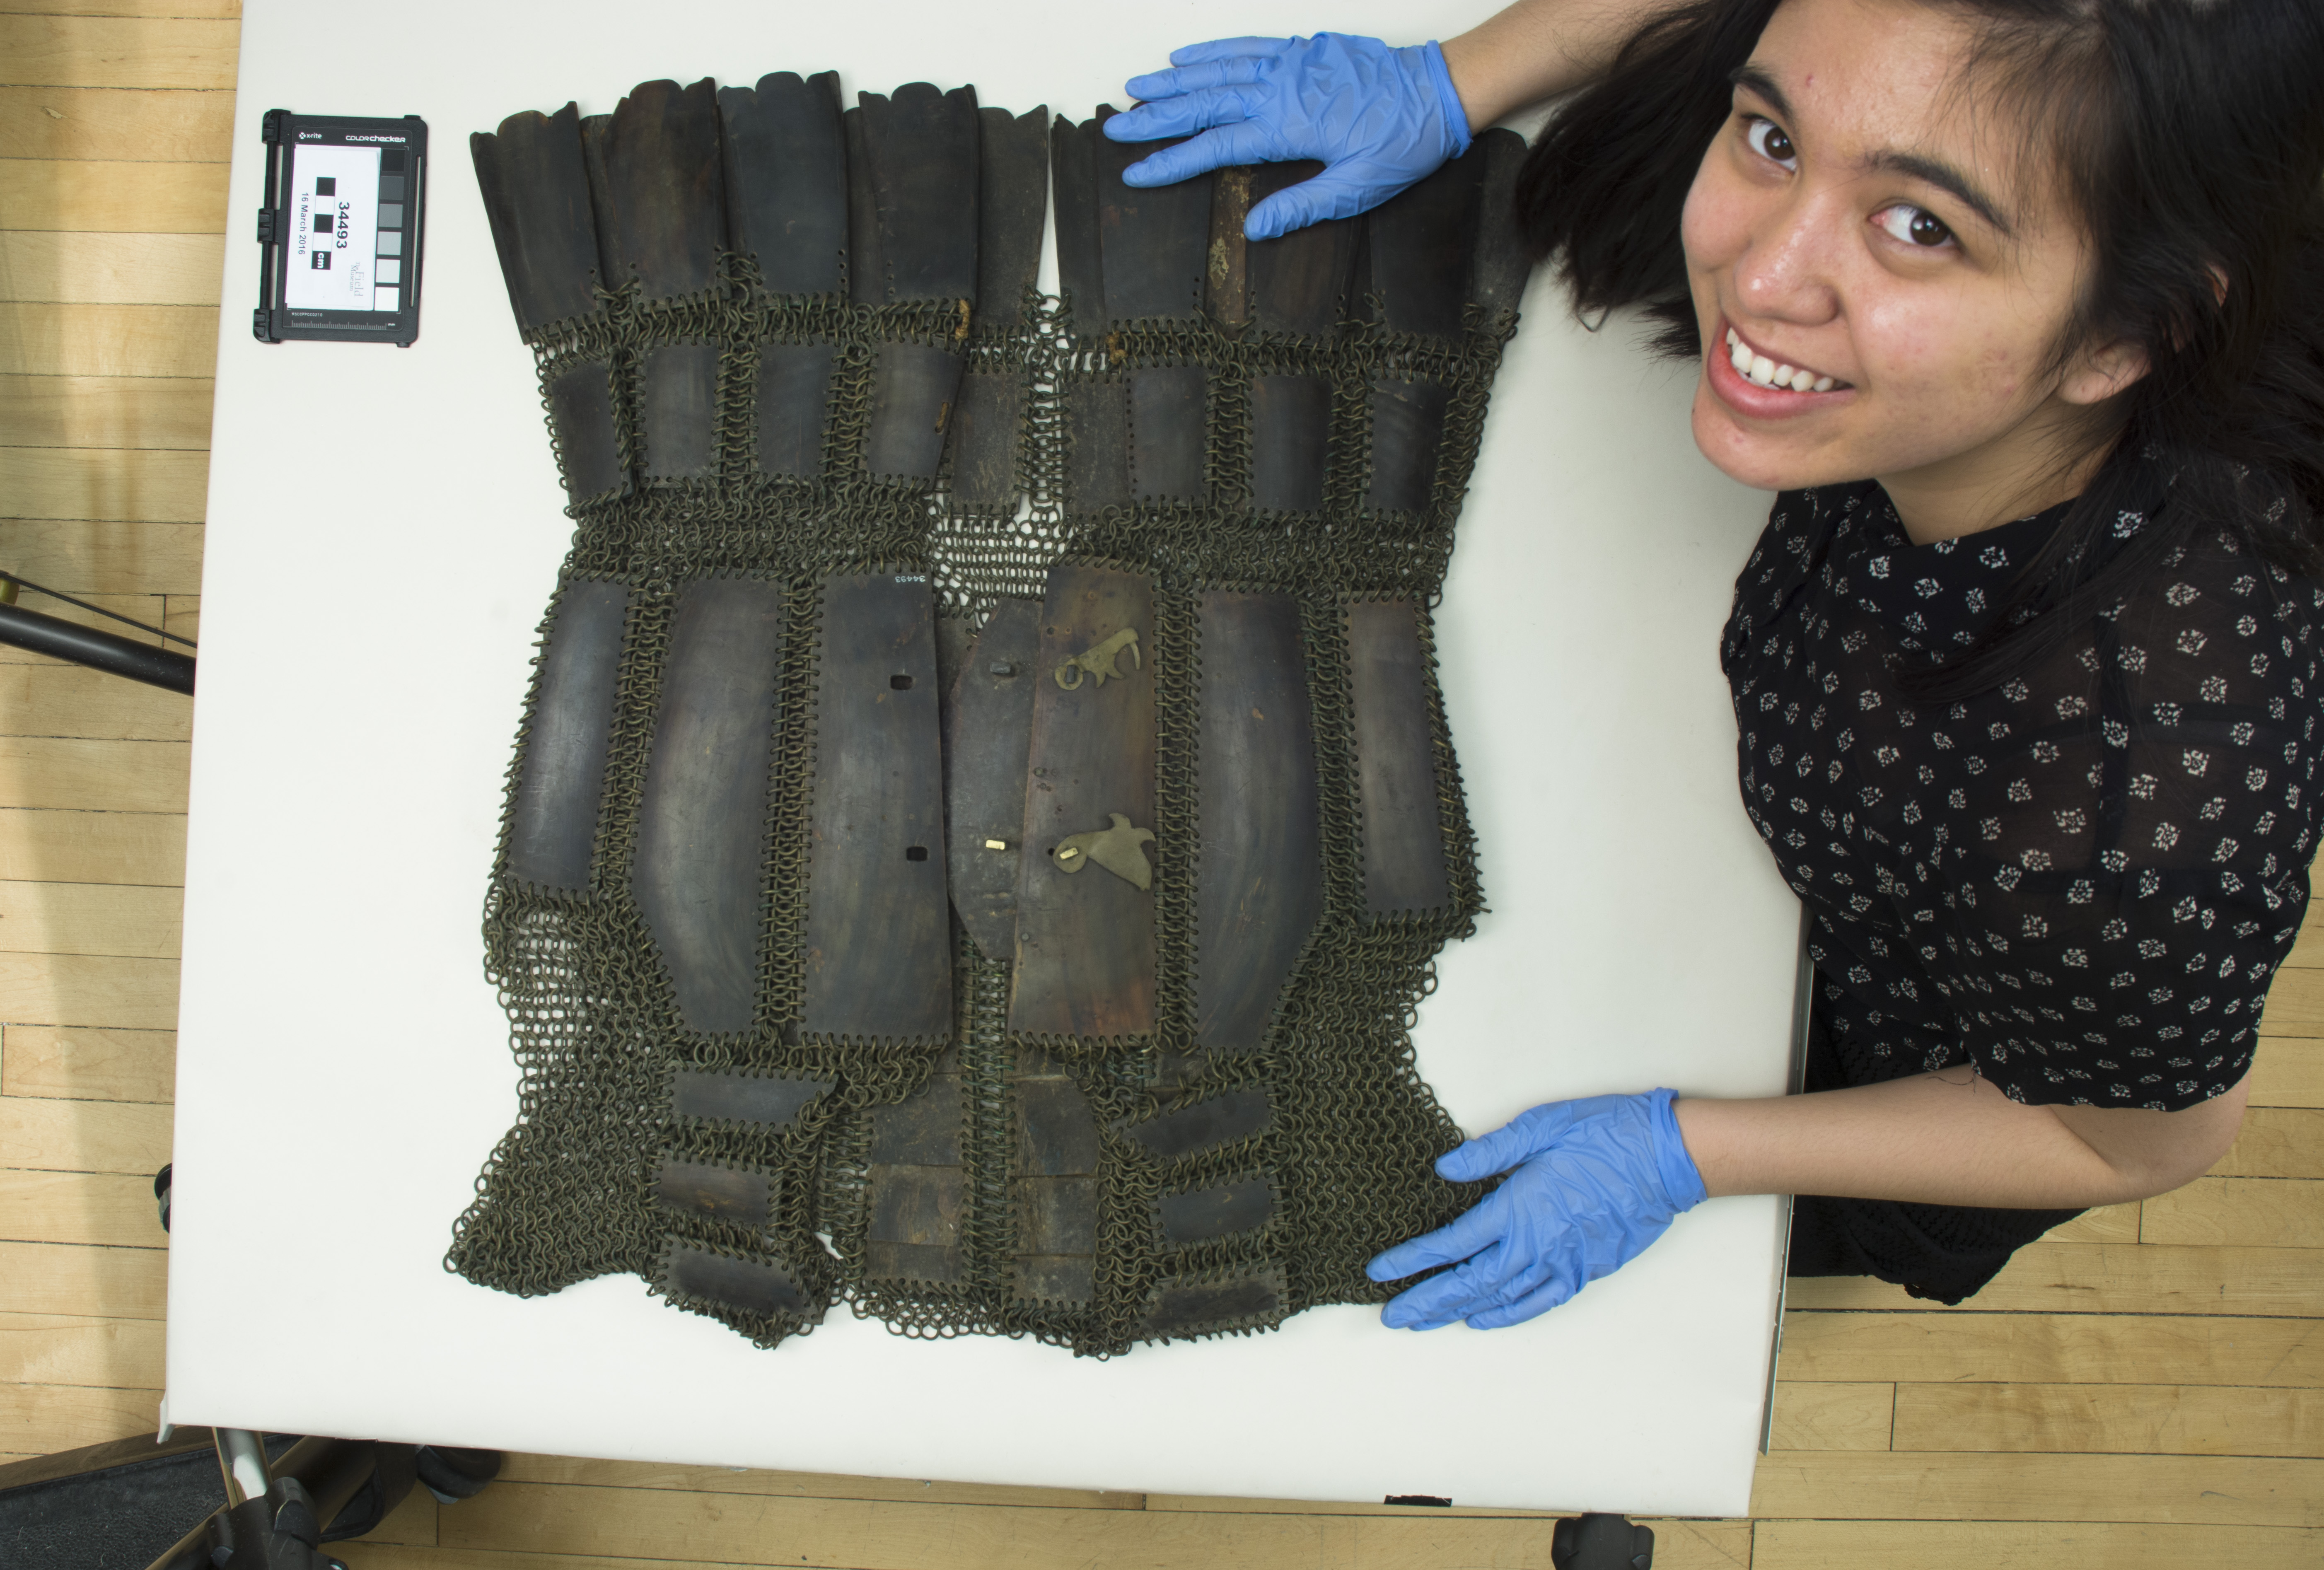 Loren photographing a suit of carabao horn armor. (c) Field Museum of Natural History - CC BY-NC 4.0